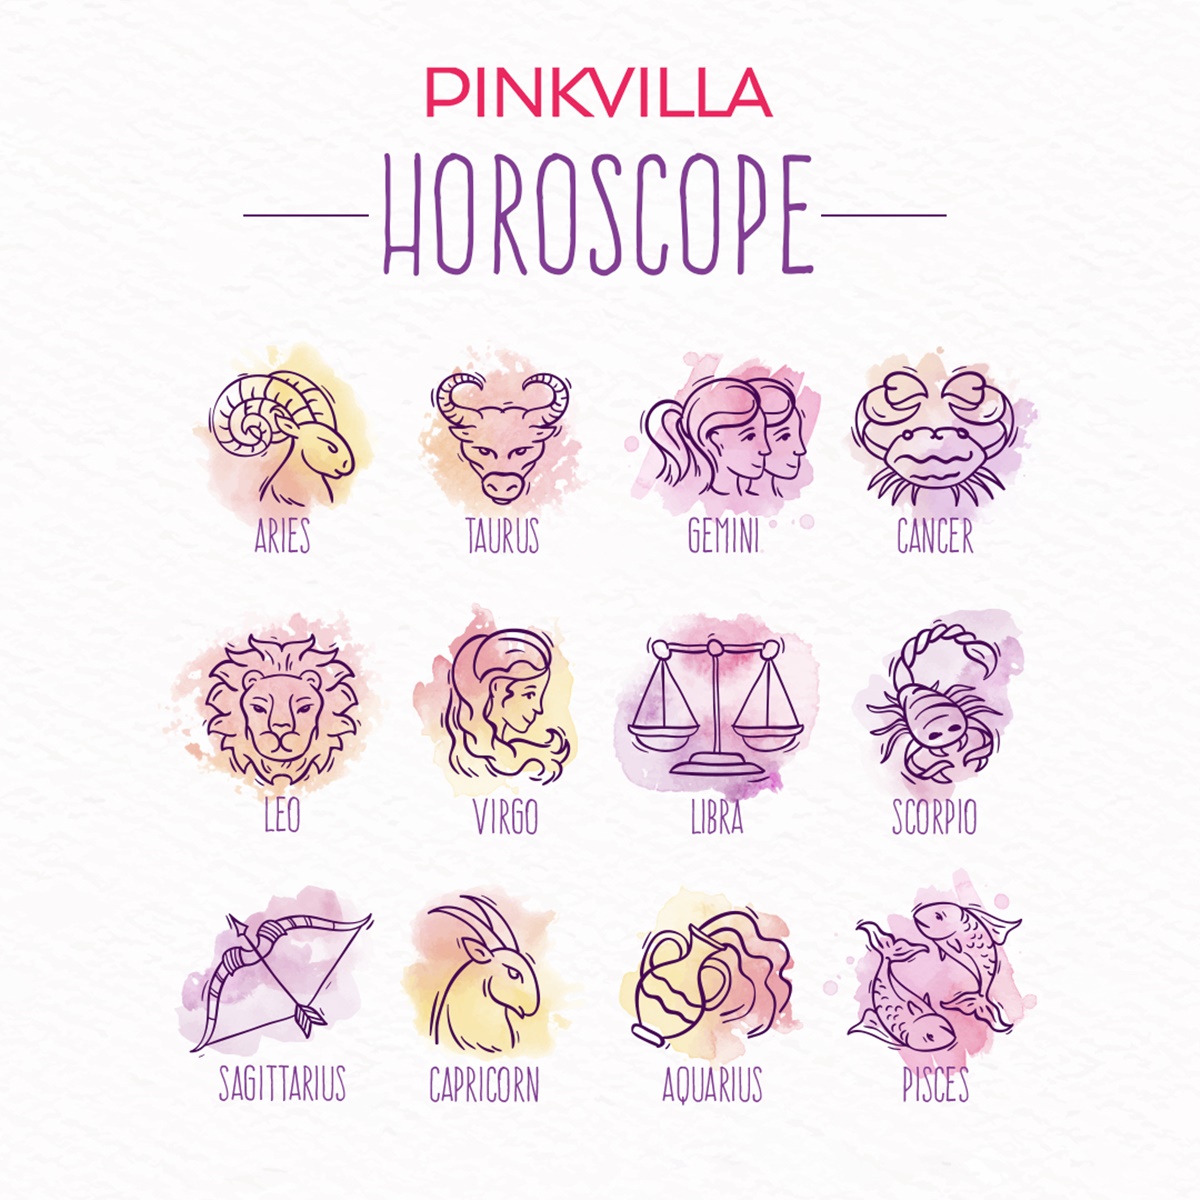 2022 Yearly Horoscope Predictions: THIS is what the year has in store for your zodiac sign